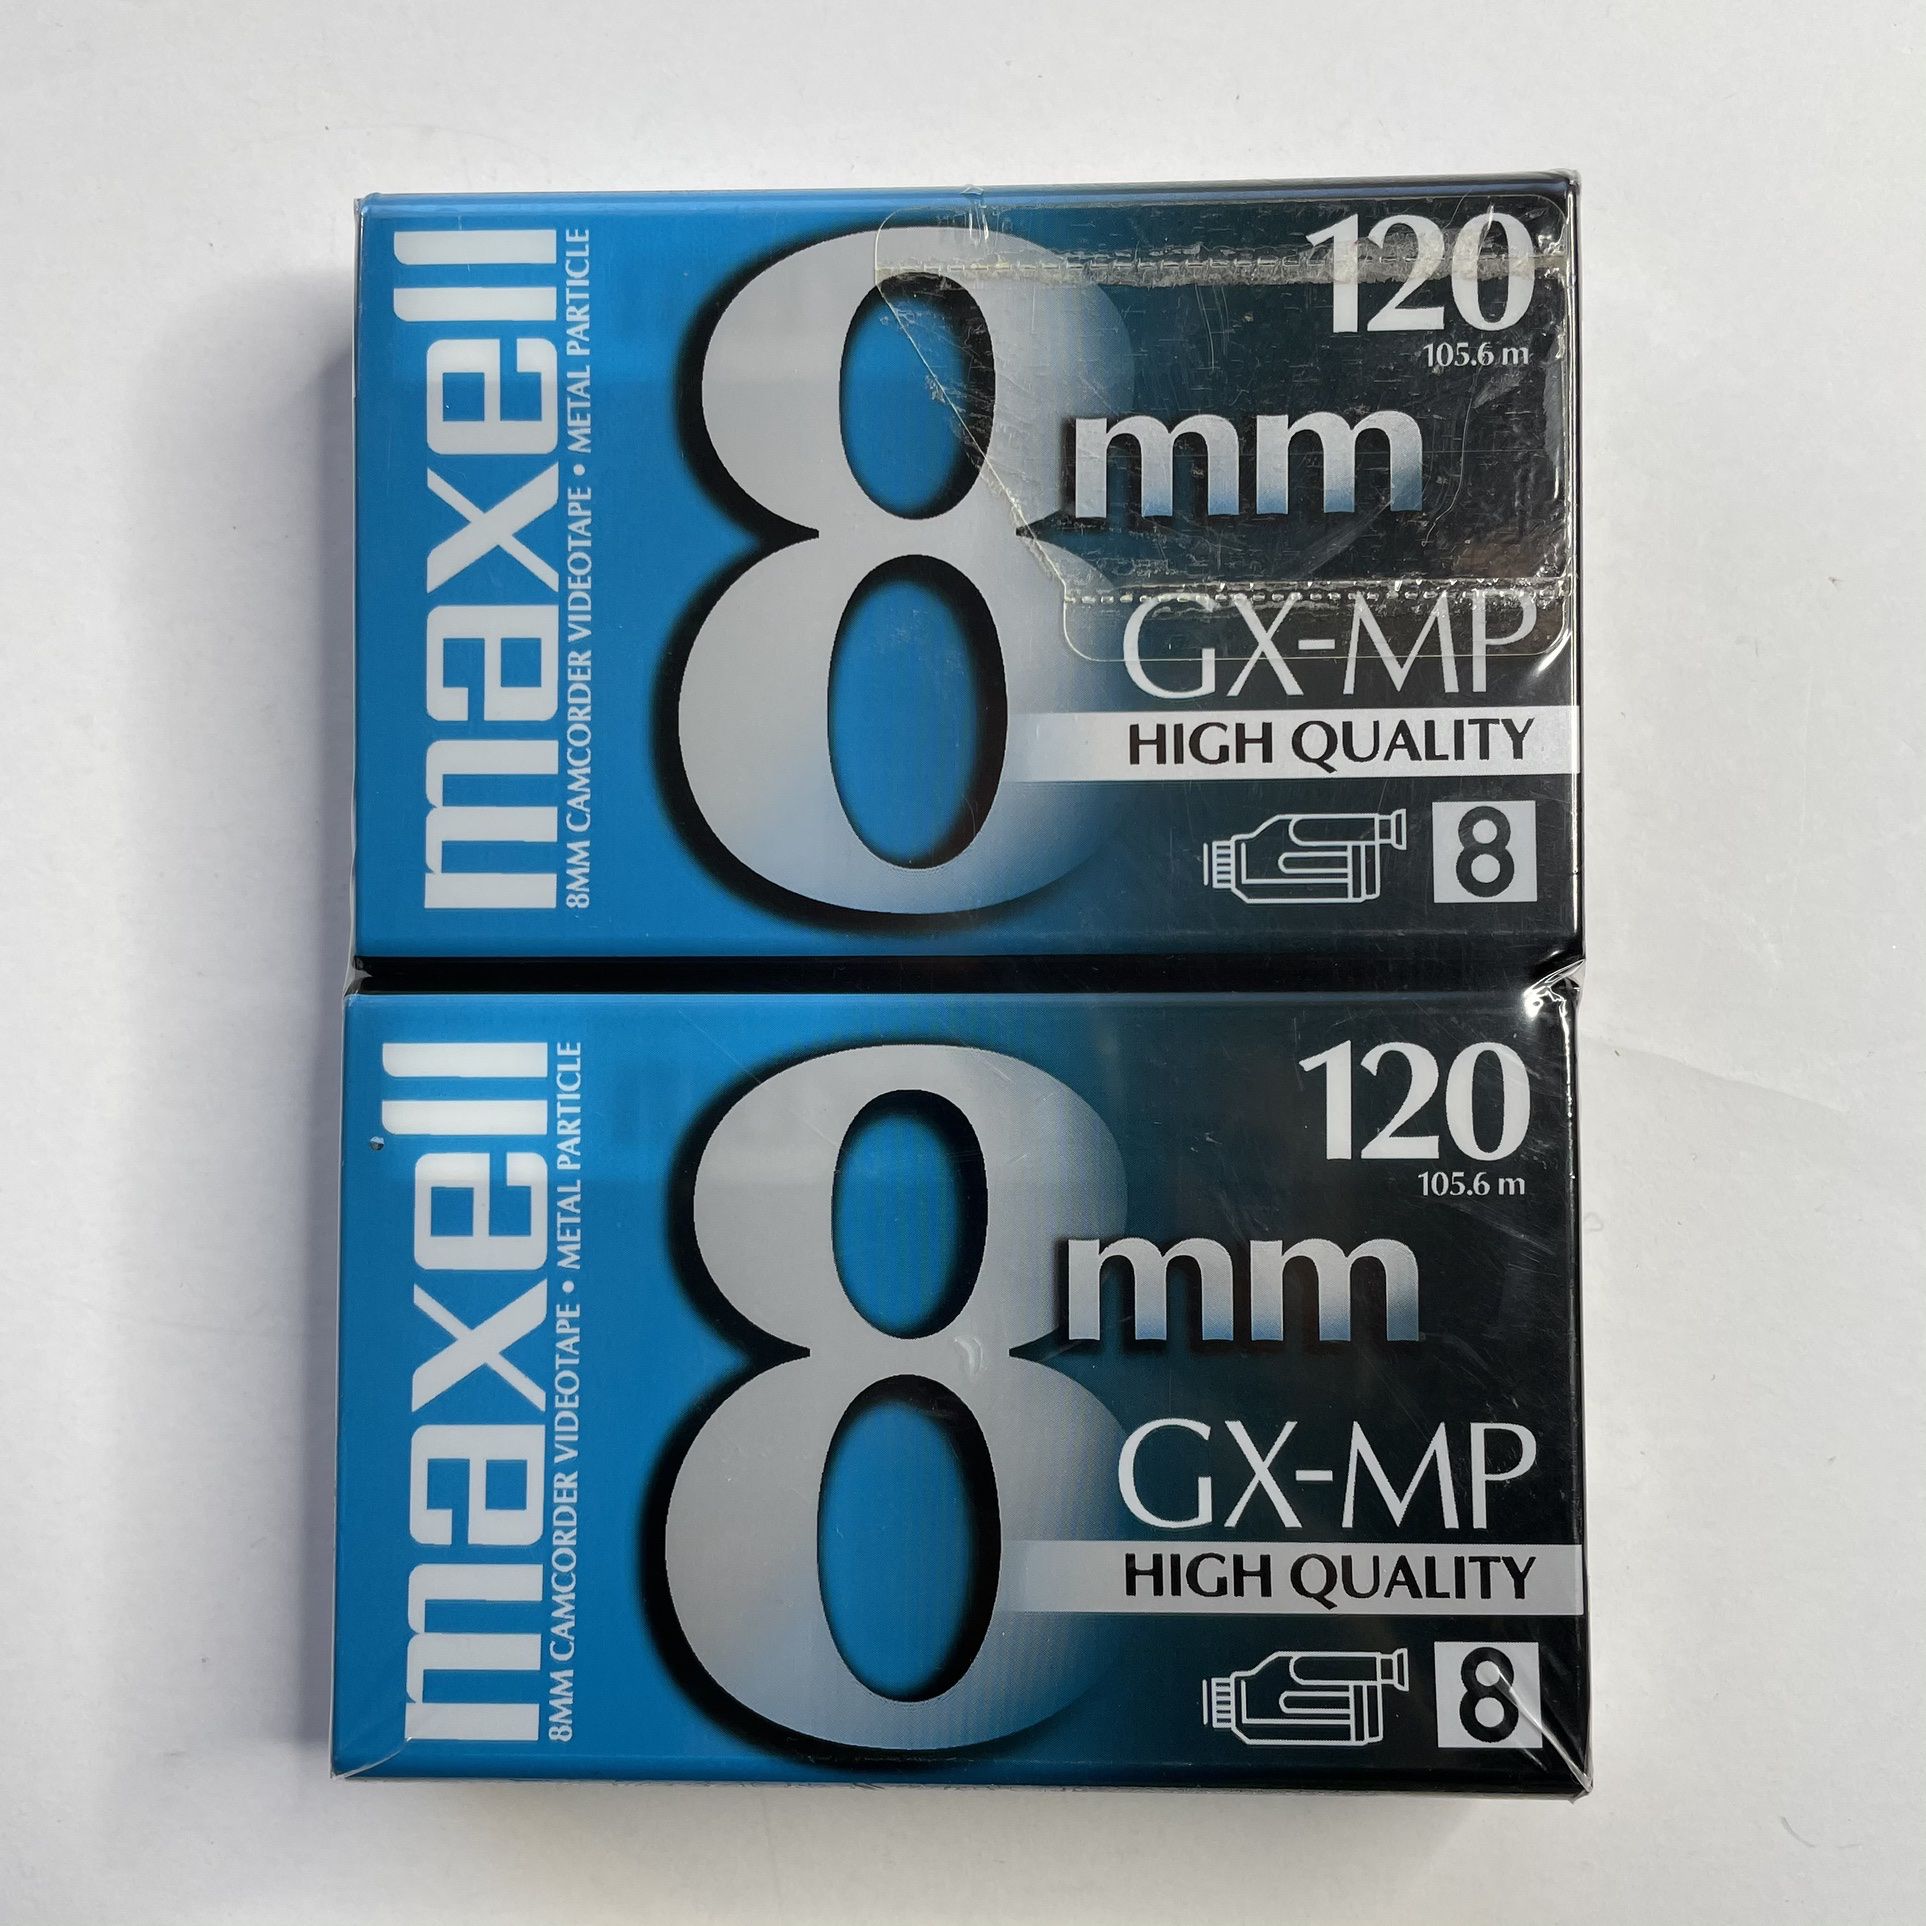 2 Maxell 8MM GX-MP High Quality 120 Minute Camcorder Tape Videotape NEW Sealed